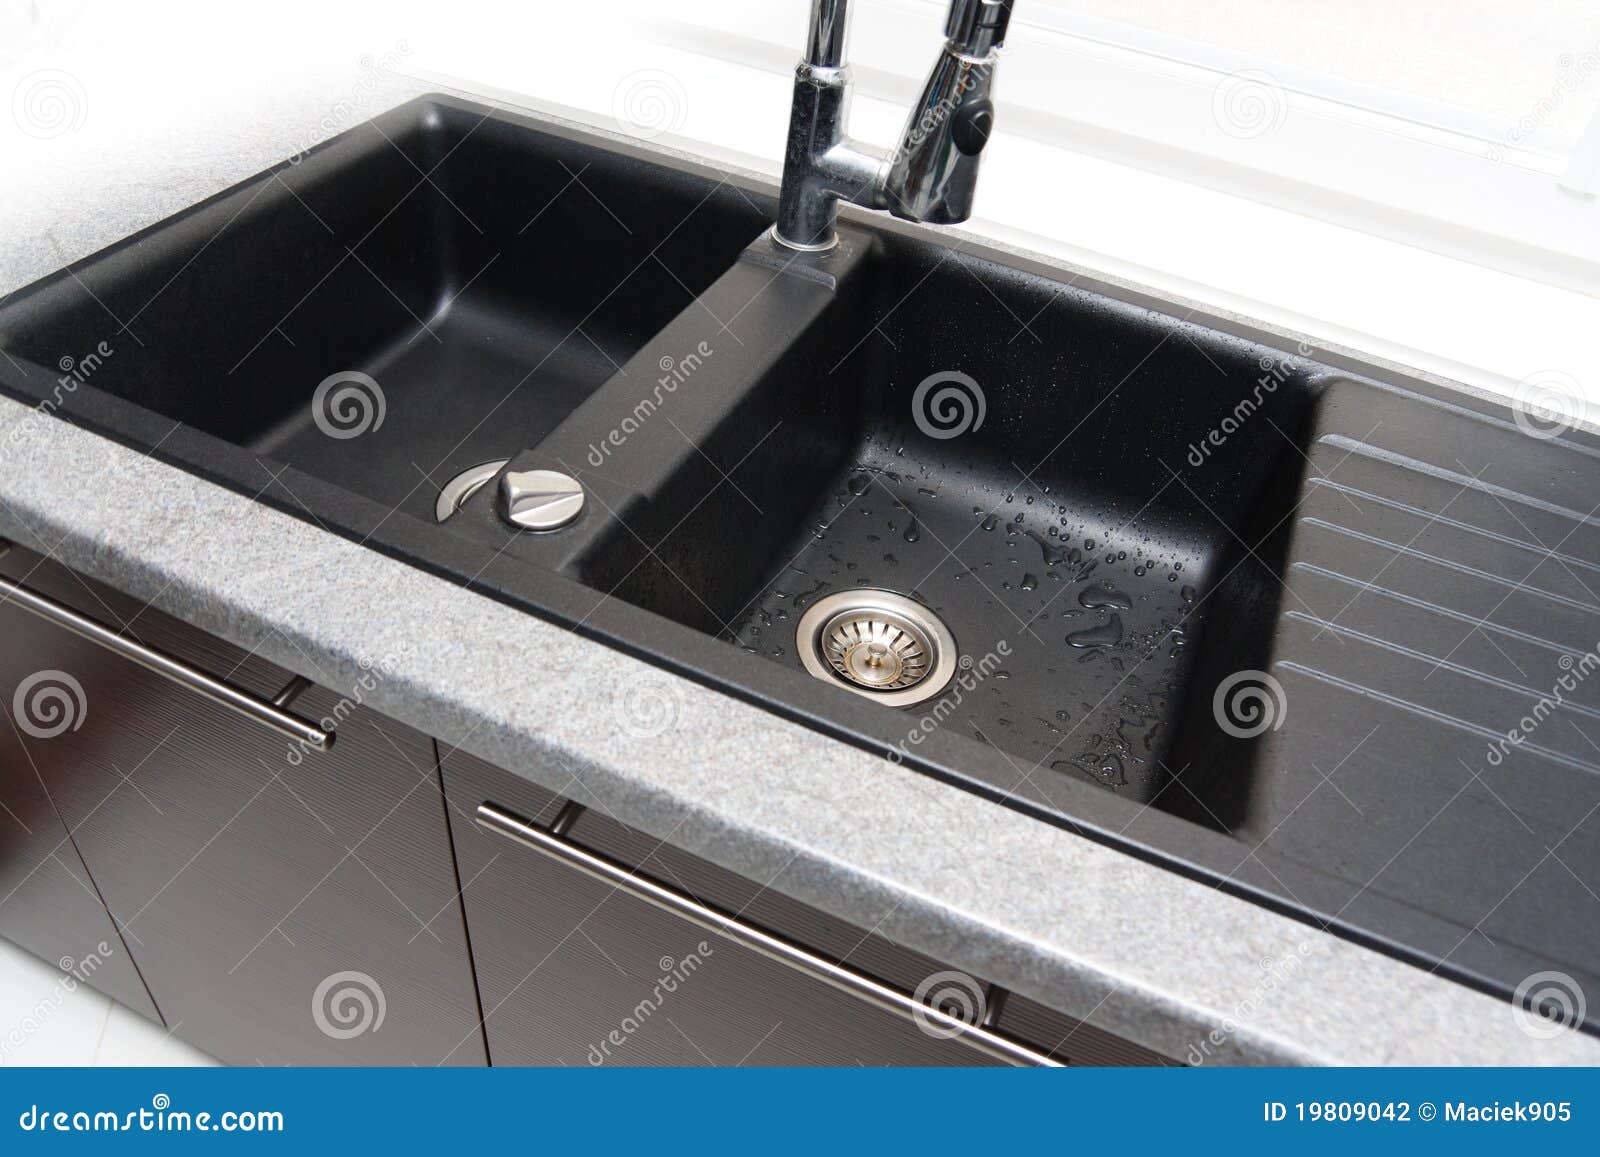 kitchen sink with the mixer tap